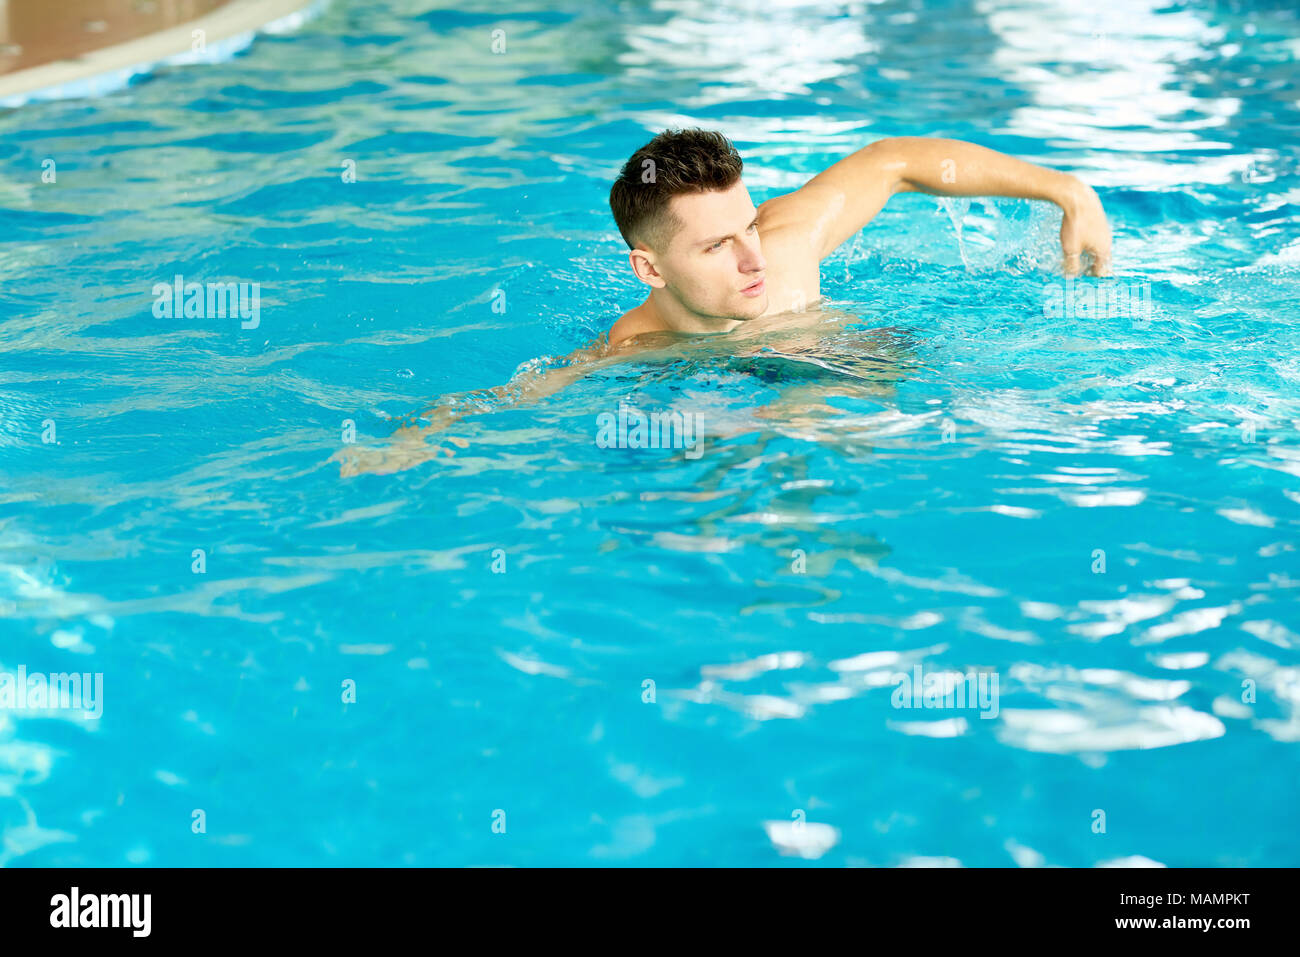 Handsome Man Swimming in Pool Stock Photo